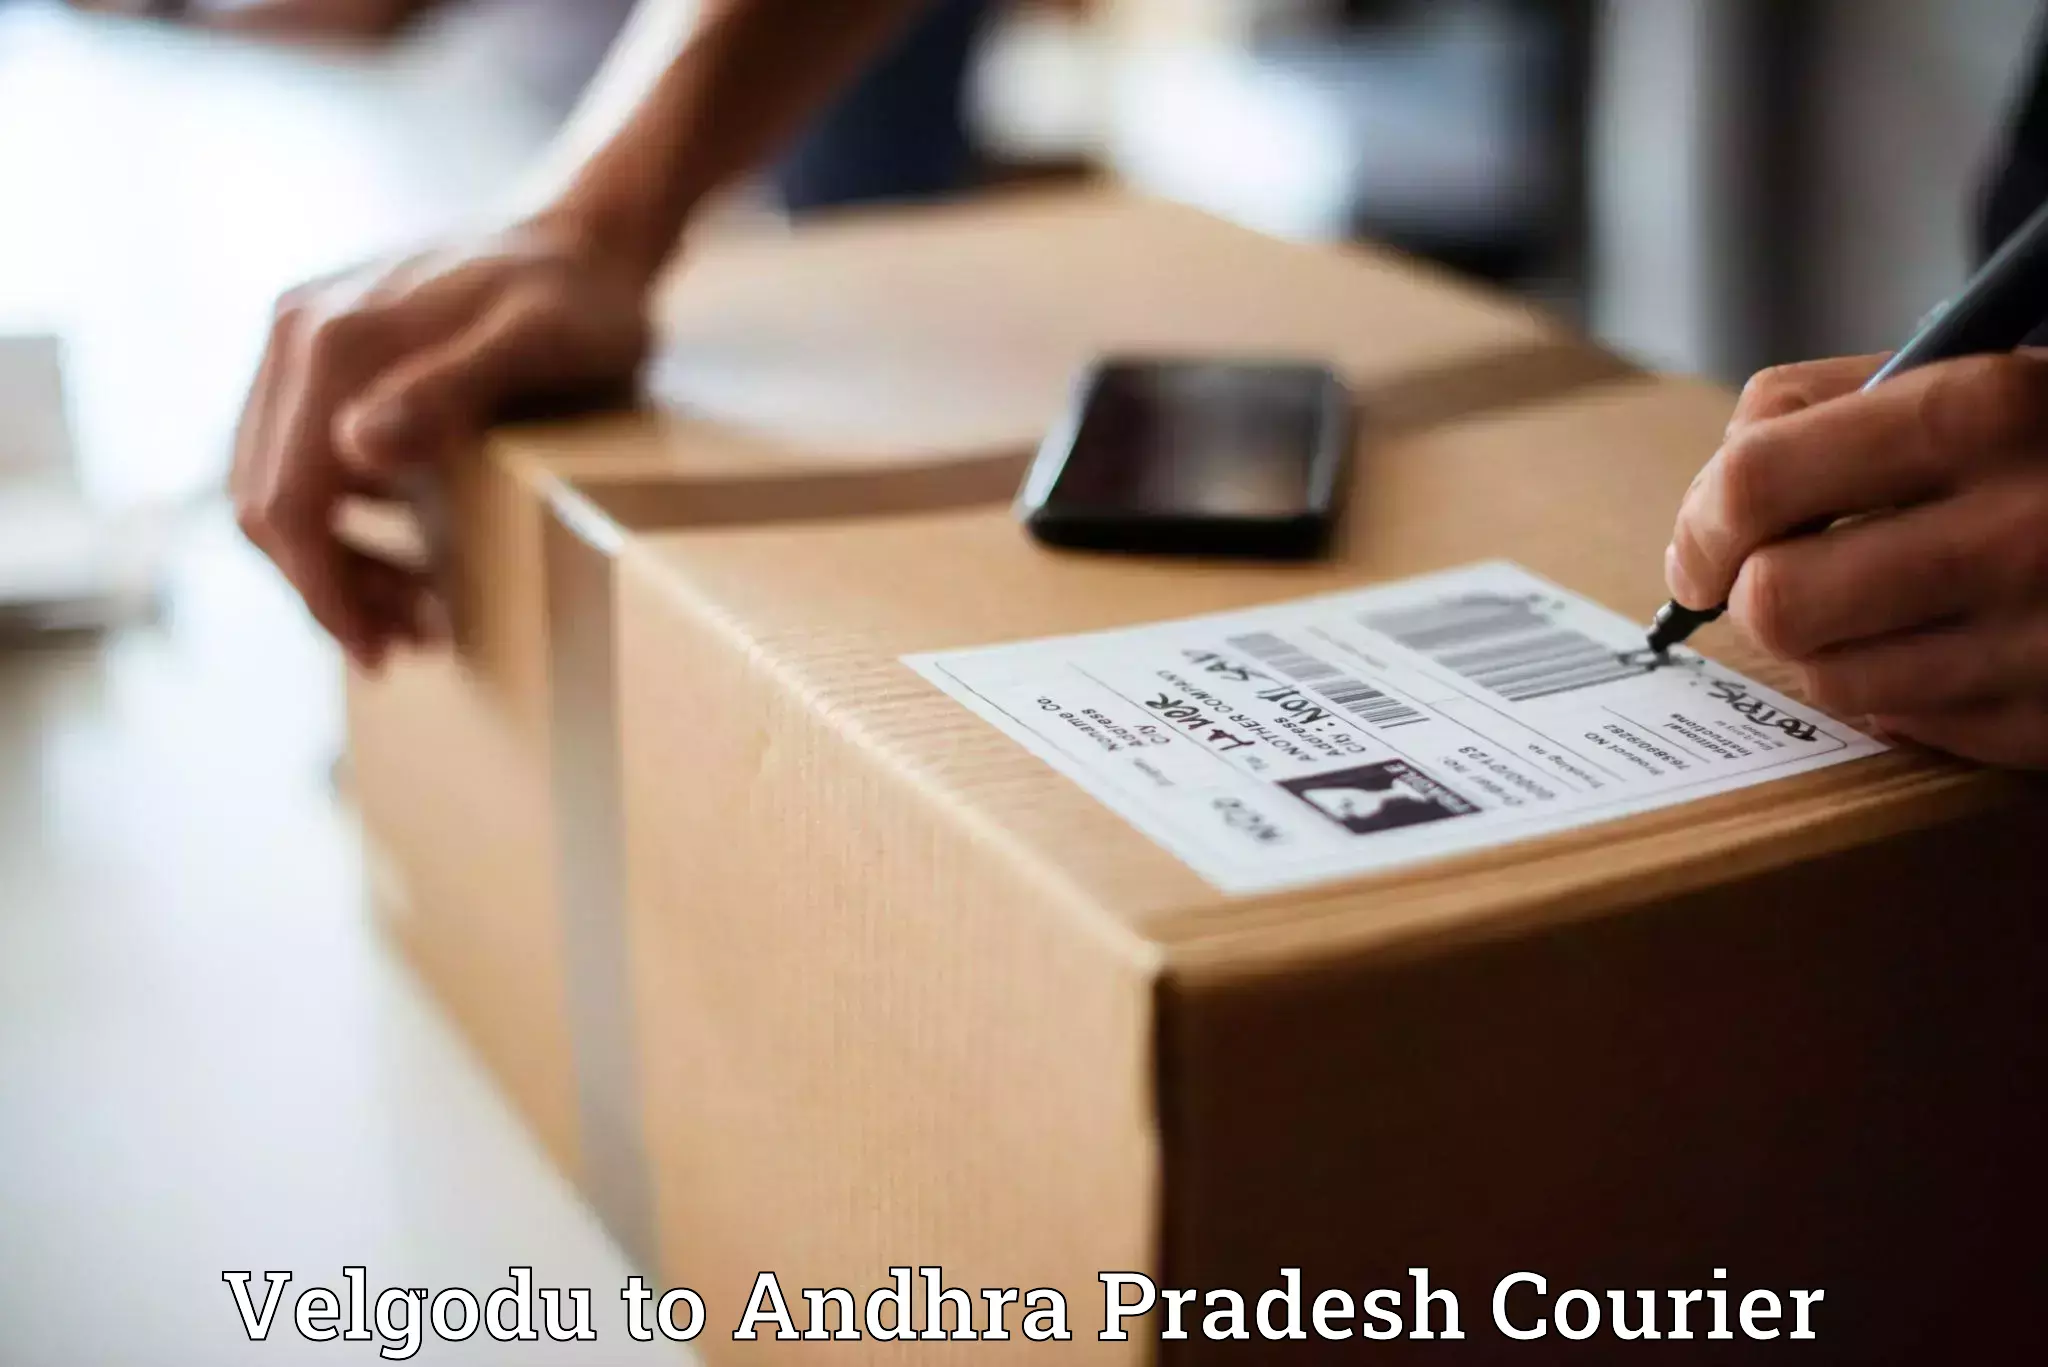 Express delivery solutions in Velgodu to Changaroth